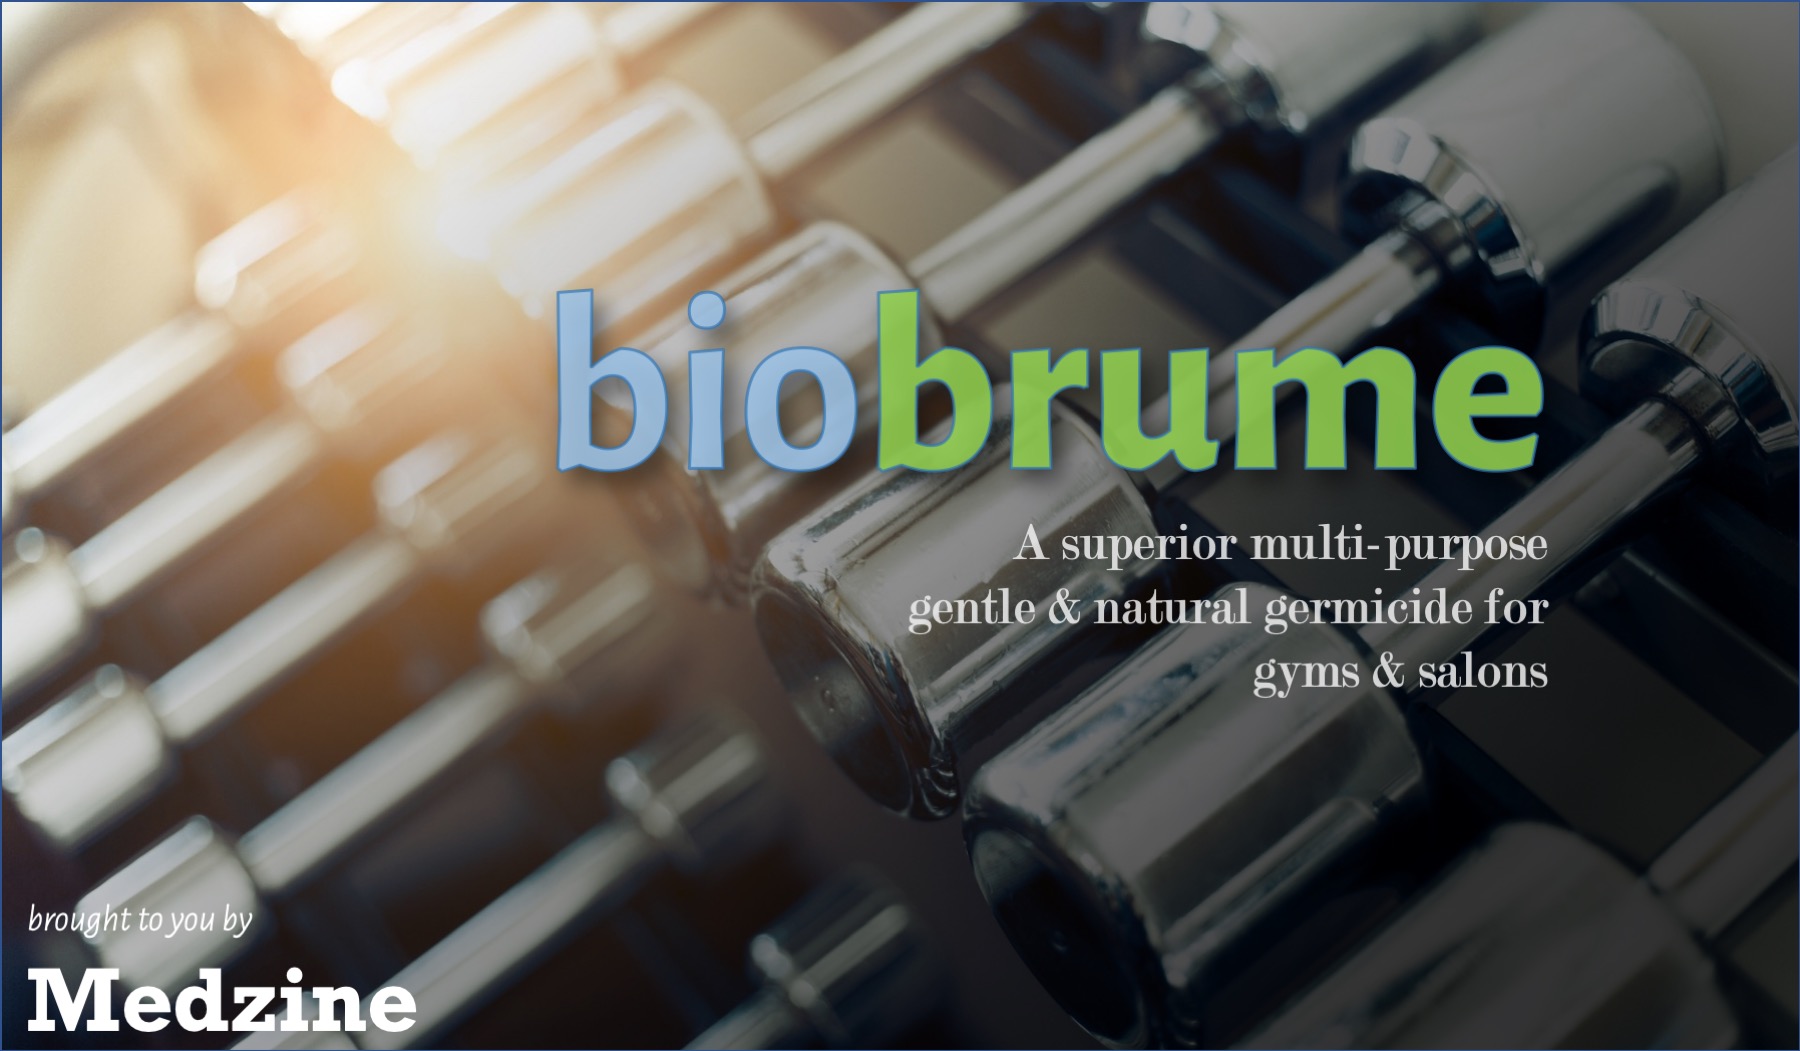 Use Biobrume To Sanitize & Disinfect In Gyms, Spas And Salons